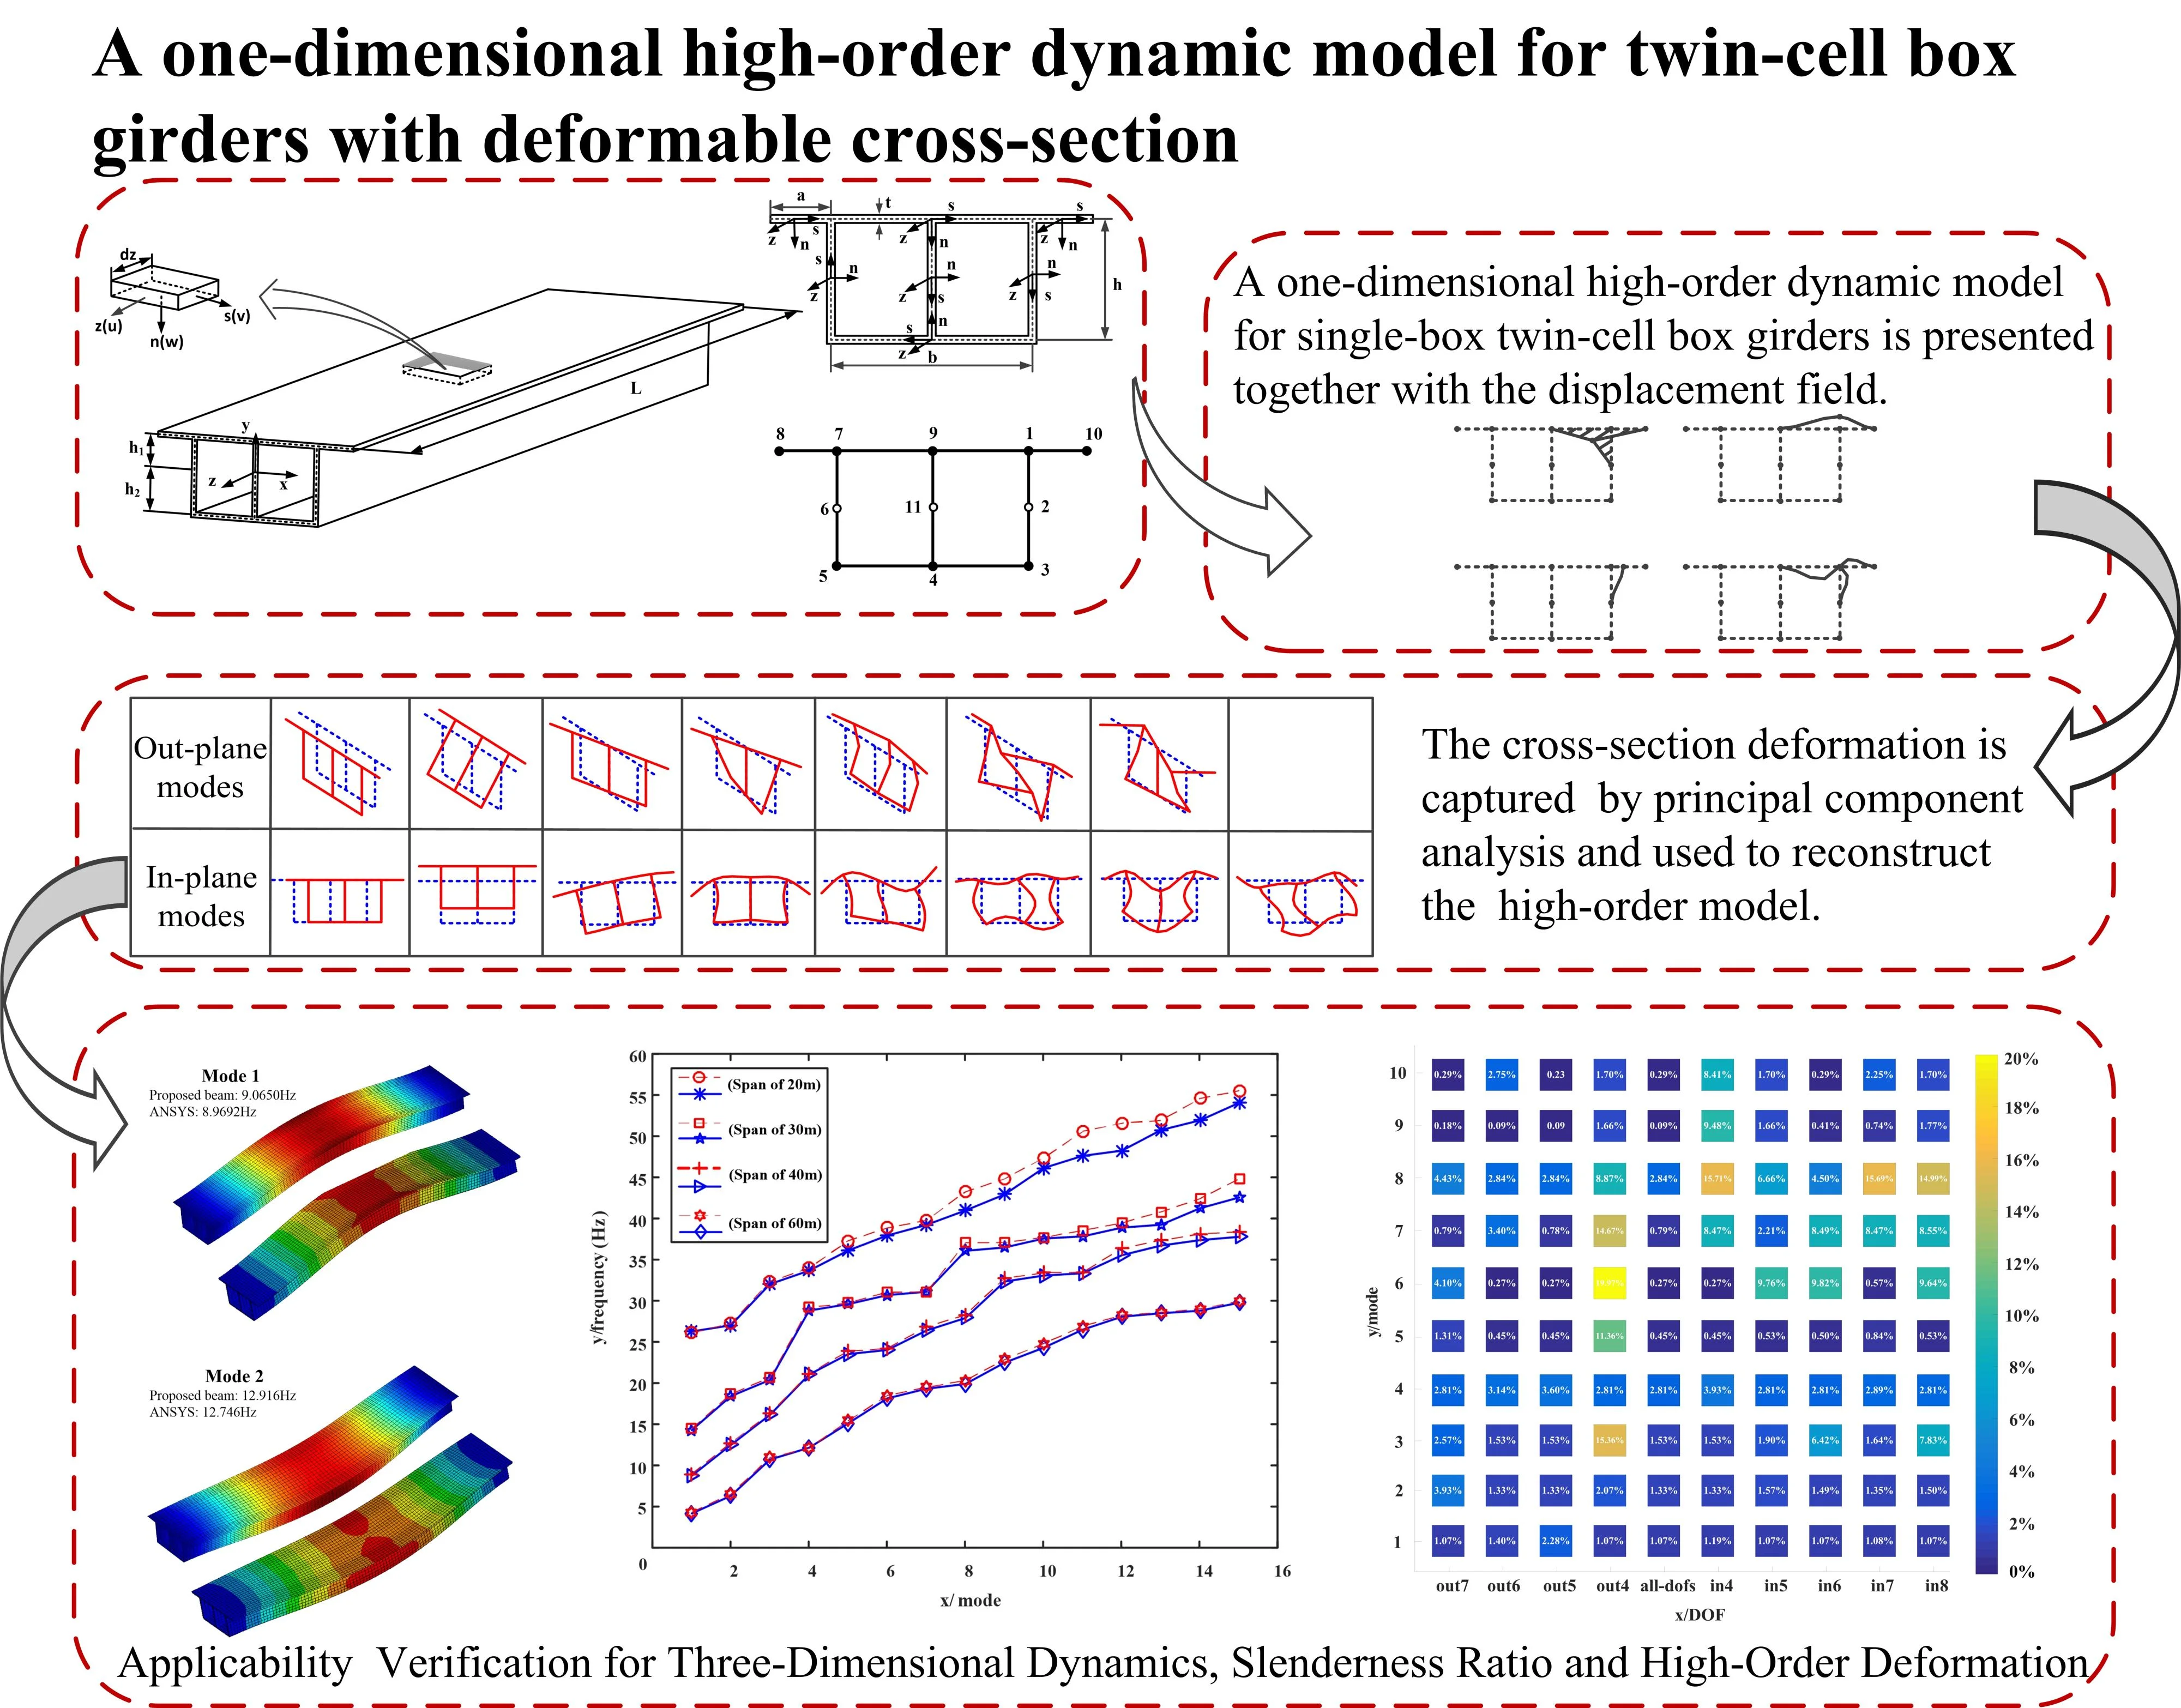 A one-dimensional high-order dynamic model for twin-cell box girders with deformable cross-section